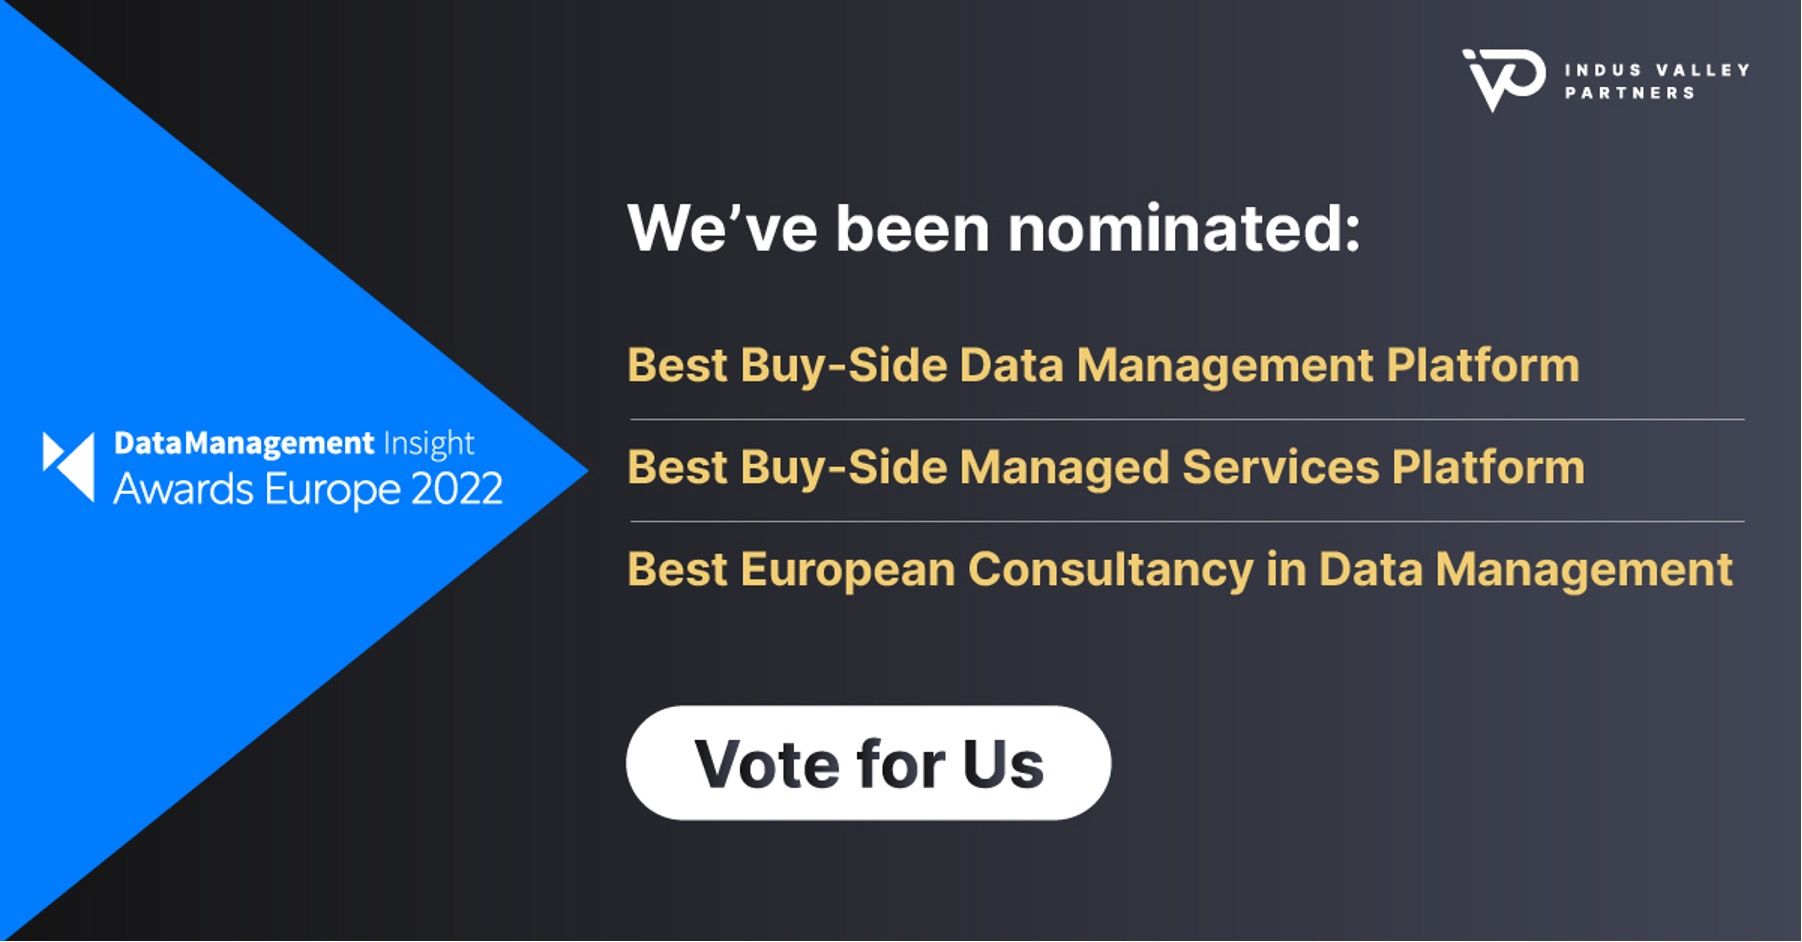 indus-valley-partners-on-linkedin-data-management-insight-awards-europe-2022-vote-for-your-winner